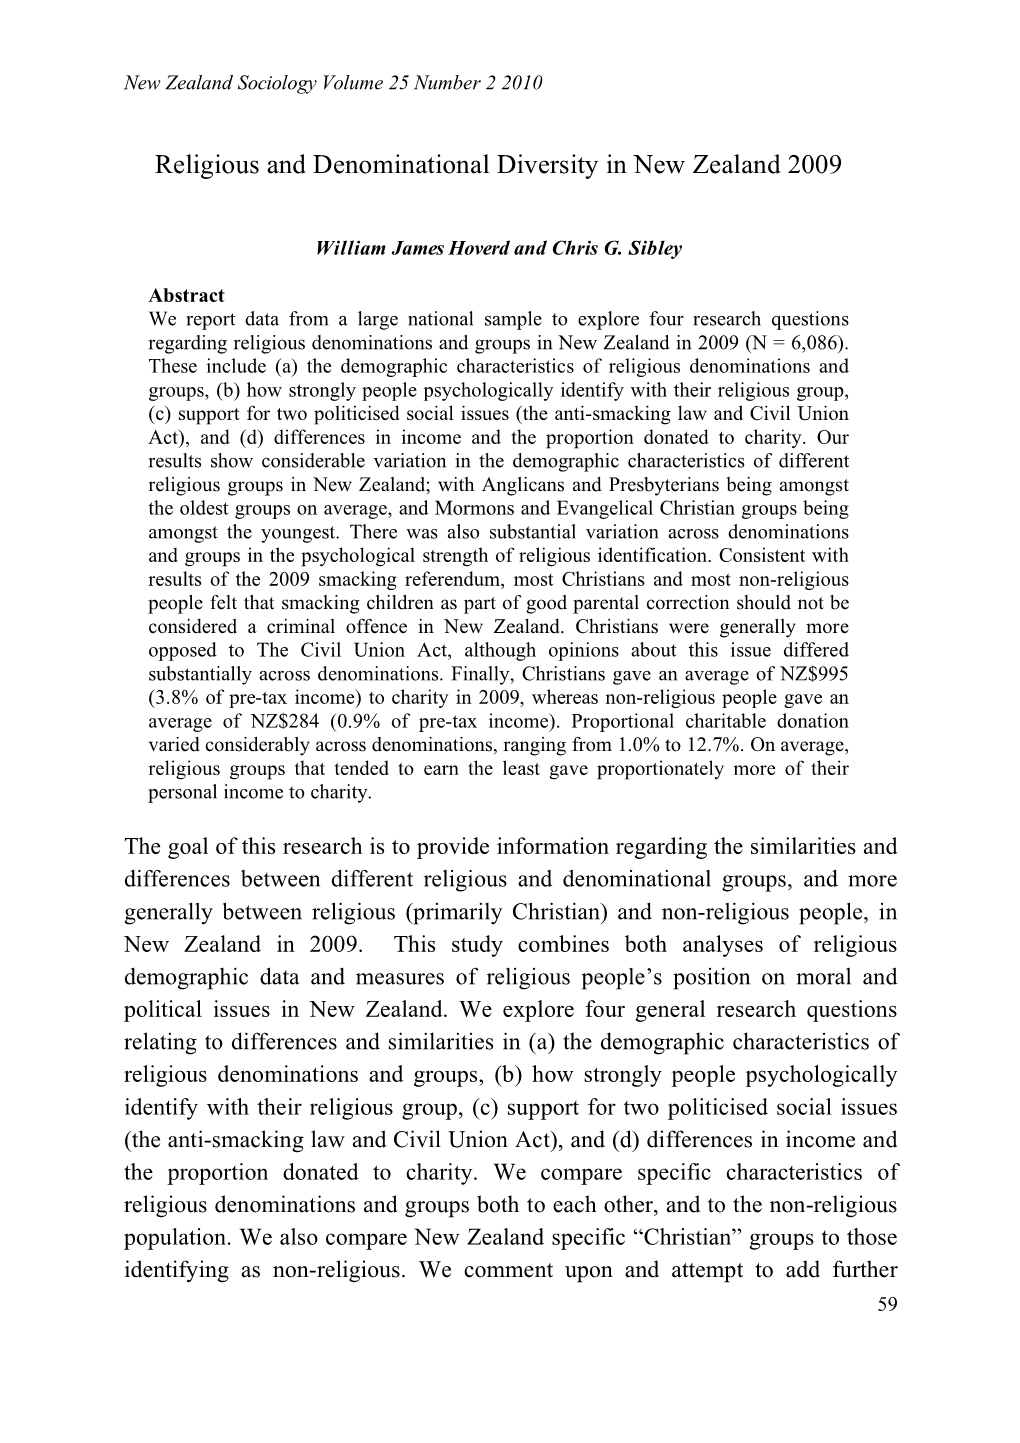 Religious and Denominational Diversity in New Zealand 2009